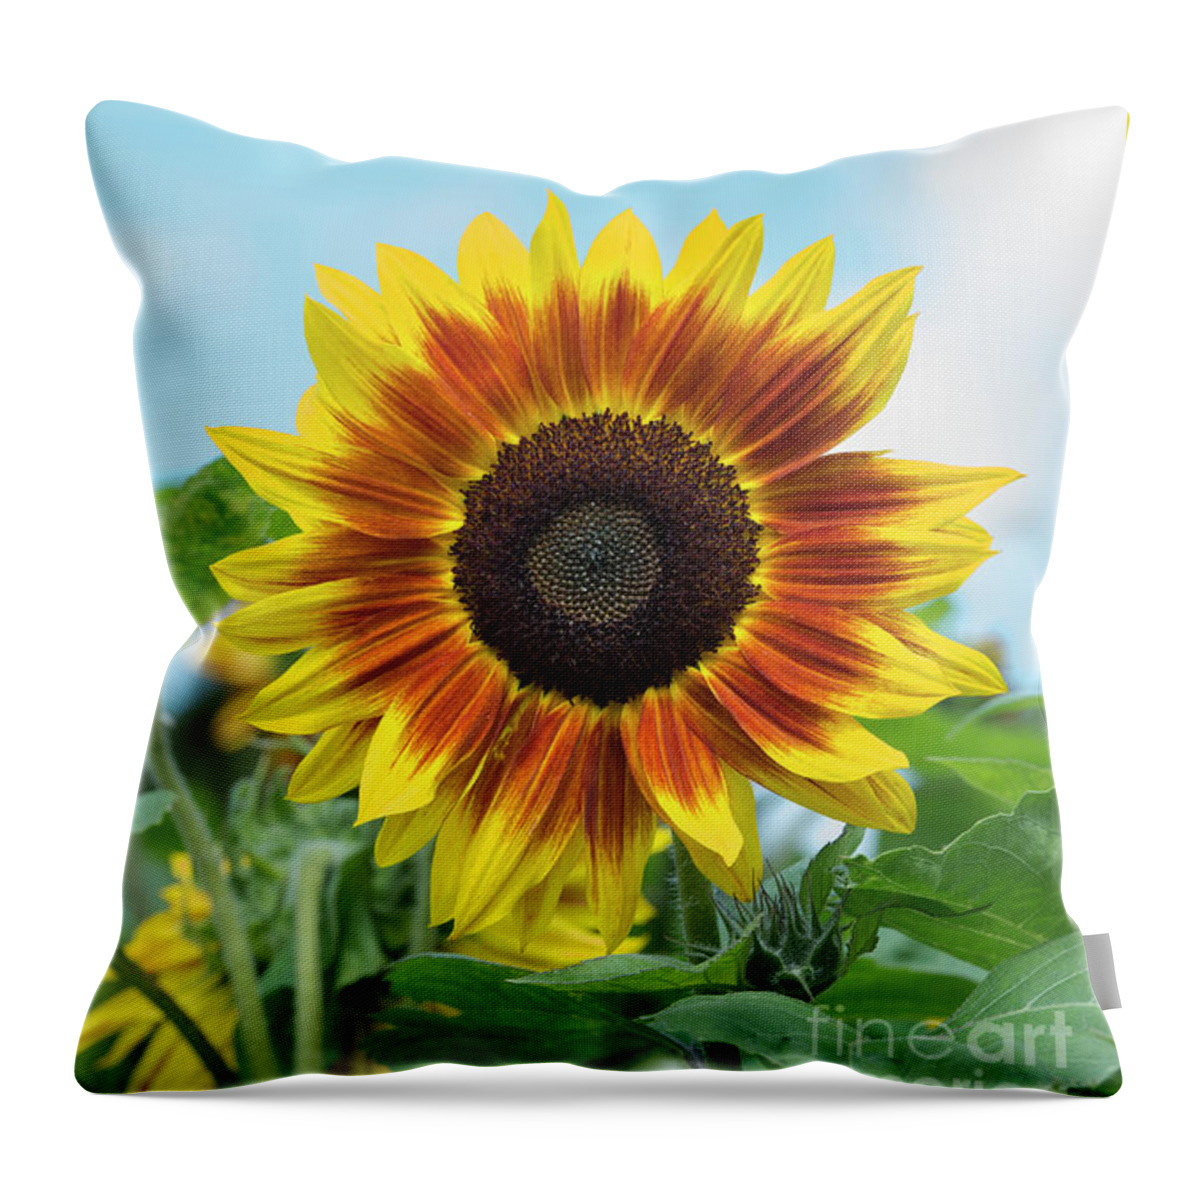 Sunflower Harlequin Throw Pillow featuring the photograph Sunflower Harlequin by Tim Gainey